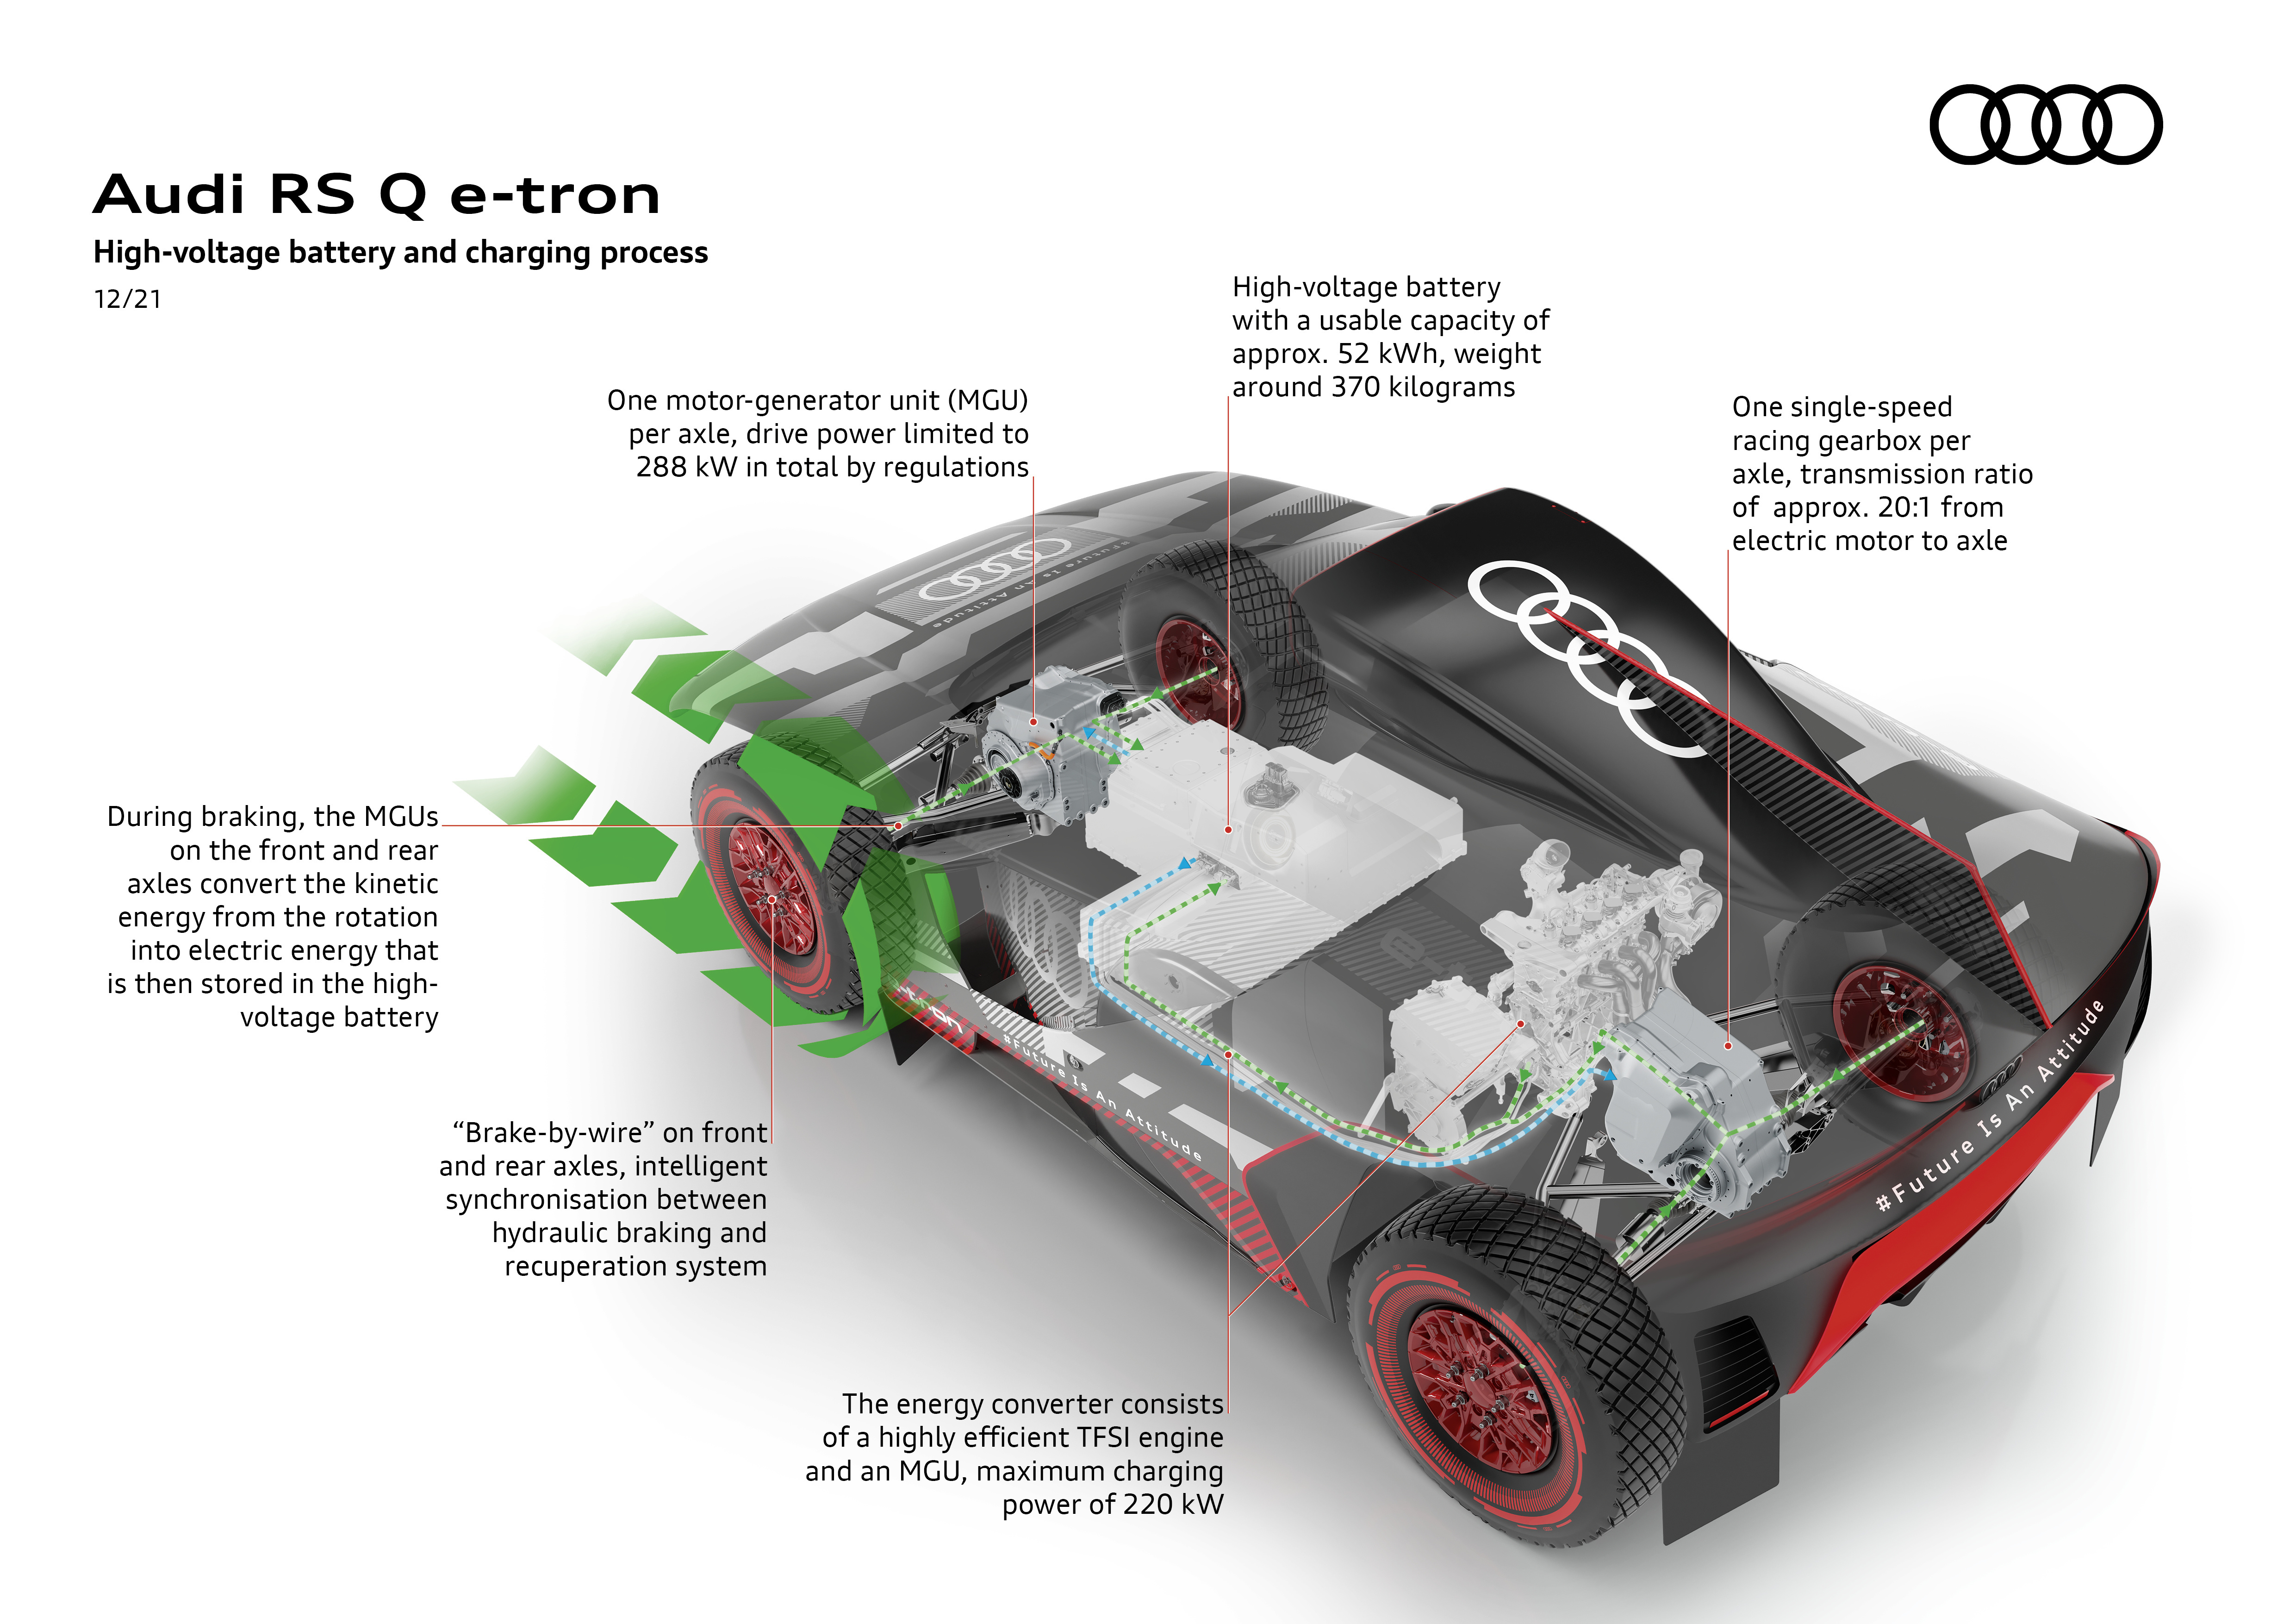 Audi RS Q e-tron, high-voltage battery and charging process